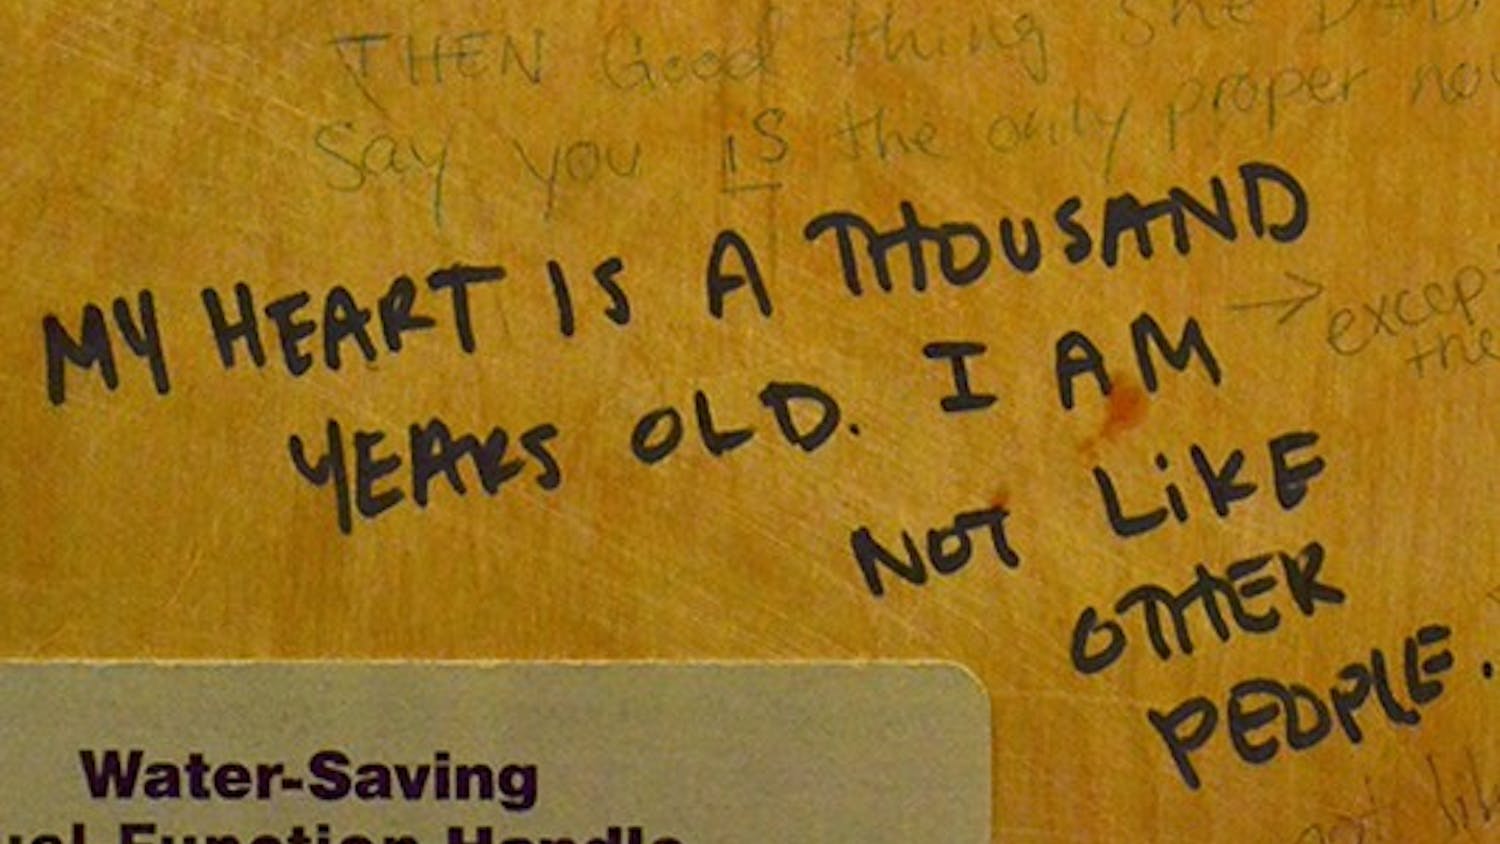 Across campus, graffiti can be found tucked away in public places. Dey Hall's fourth floor bathroom has an especially decorated stall, complete with quotes, personal statements, and drawn-out discussions.